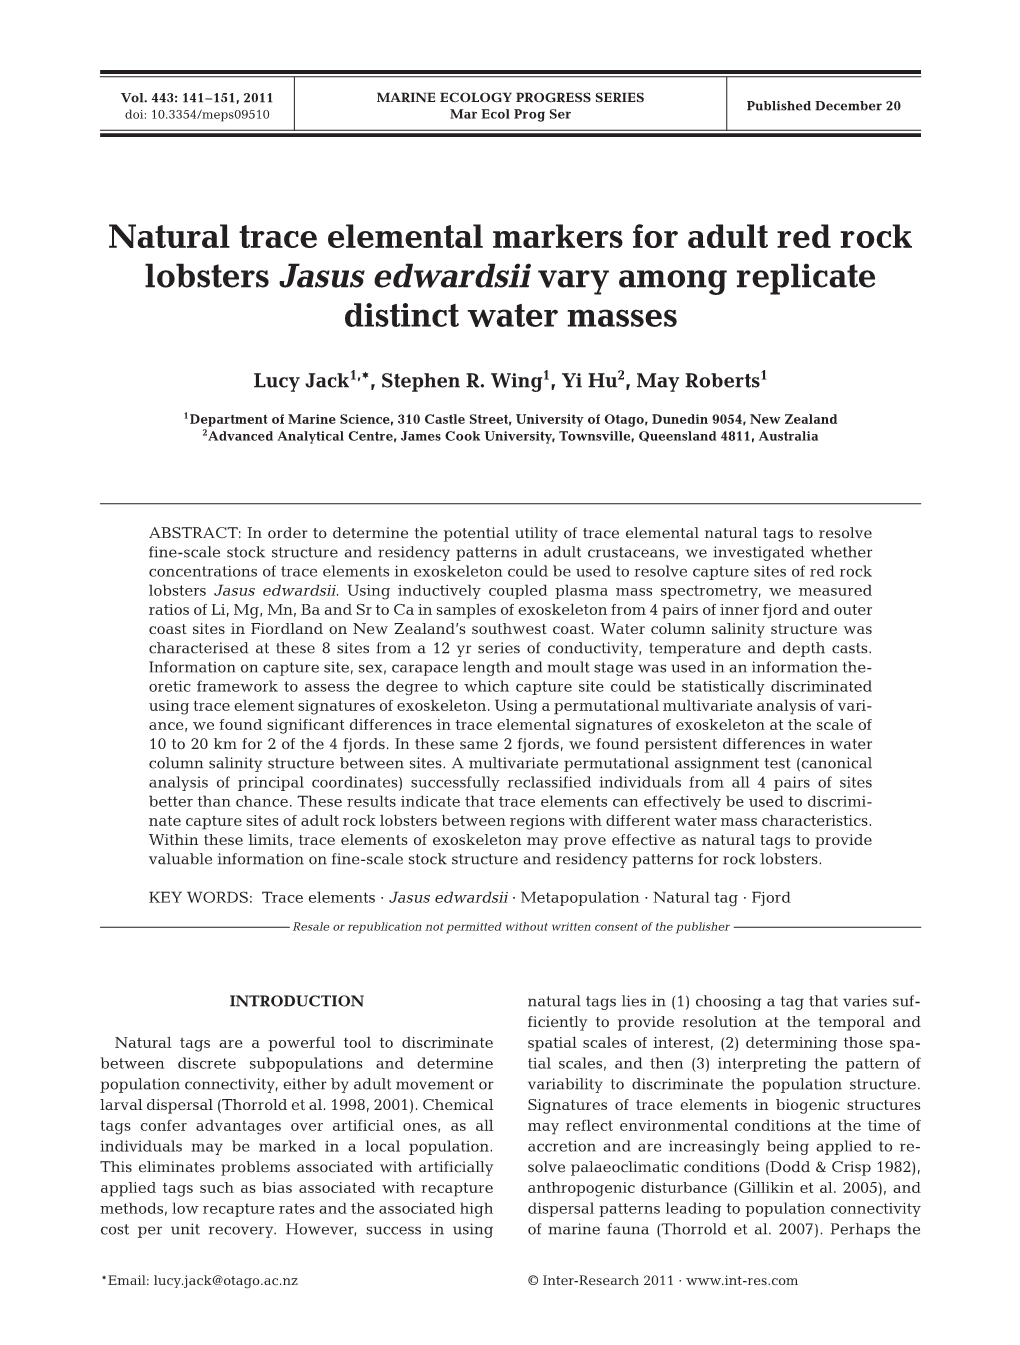 Natural Trace Elemental Markers for Adult Red Rock Lobsters Jasus Edwardsii Vary Among Replicate Distinct Water Masses